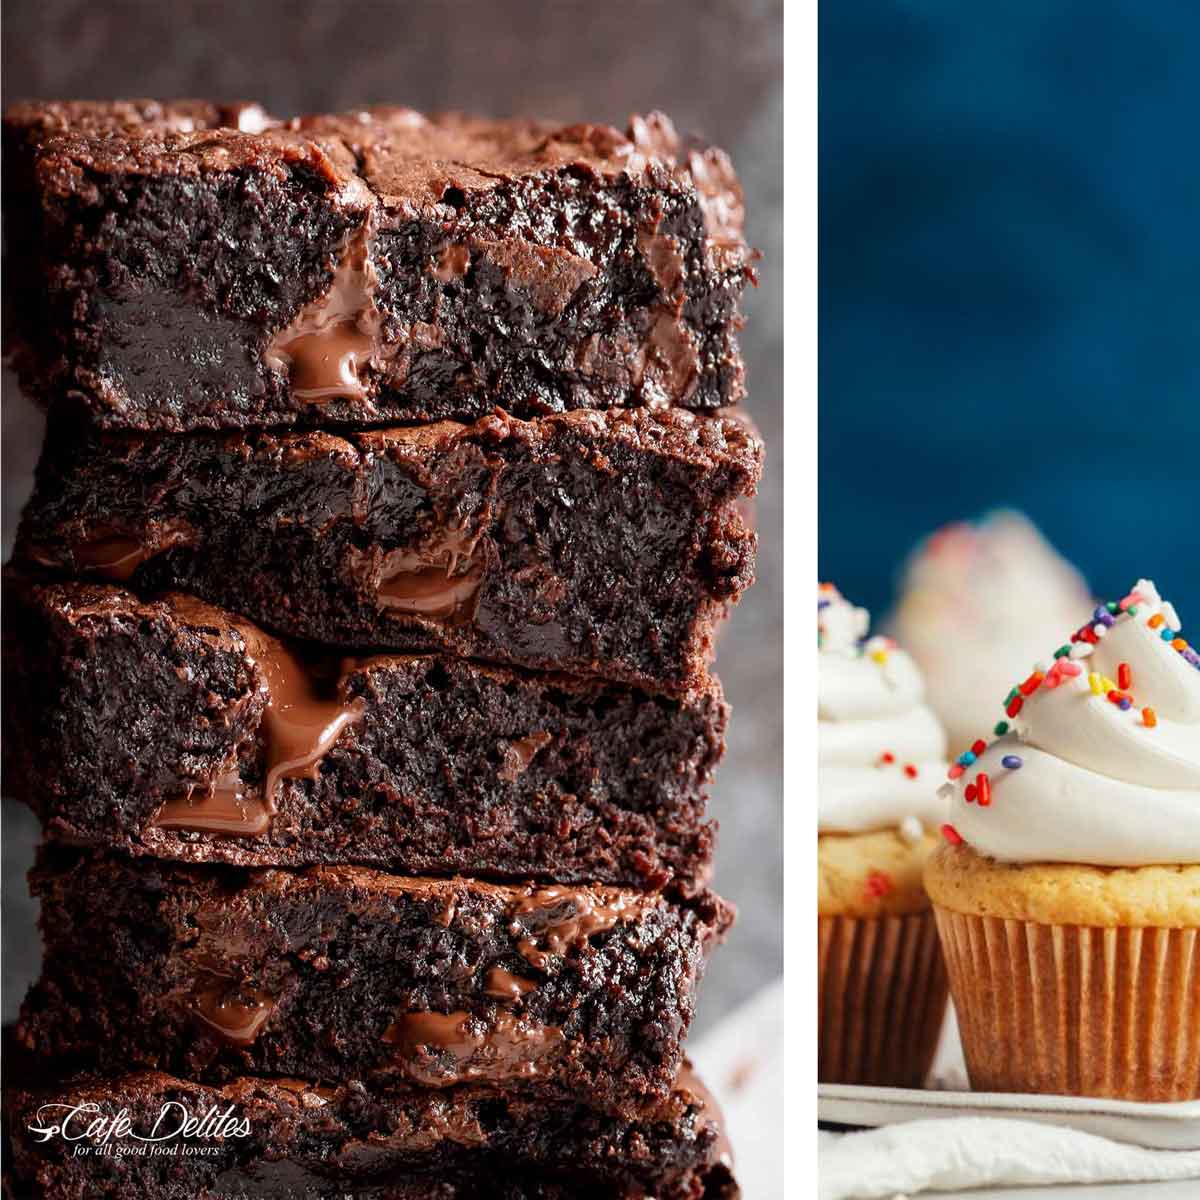 17 Scrumptious Picnic Desserts (That Don’t Need Refrigeration)